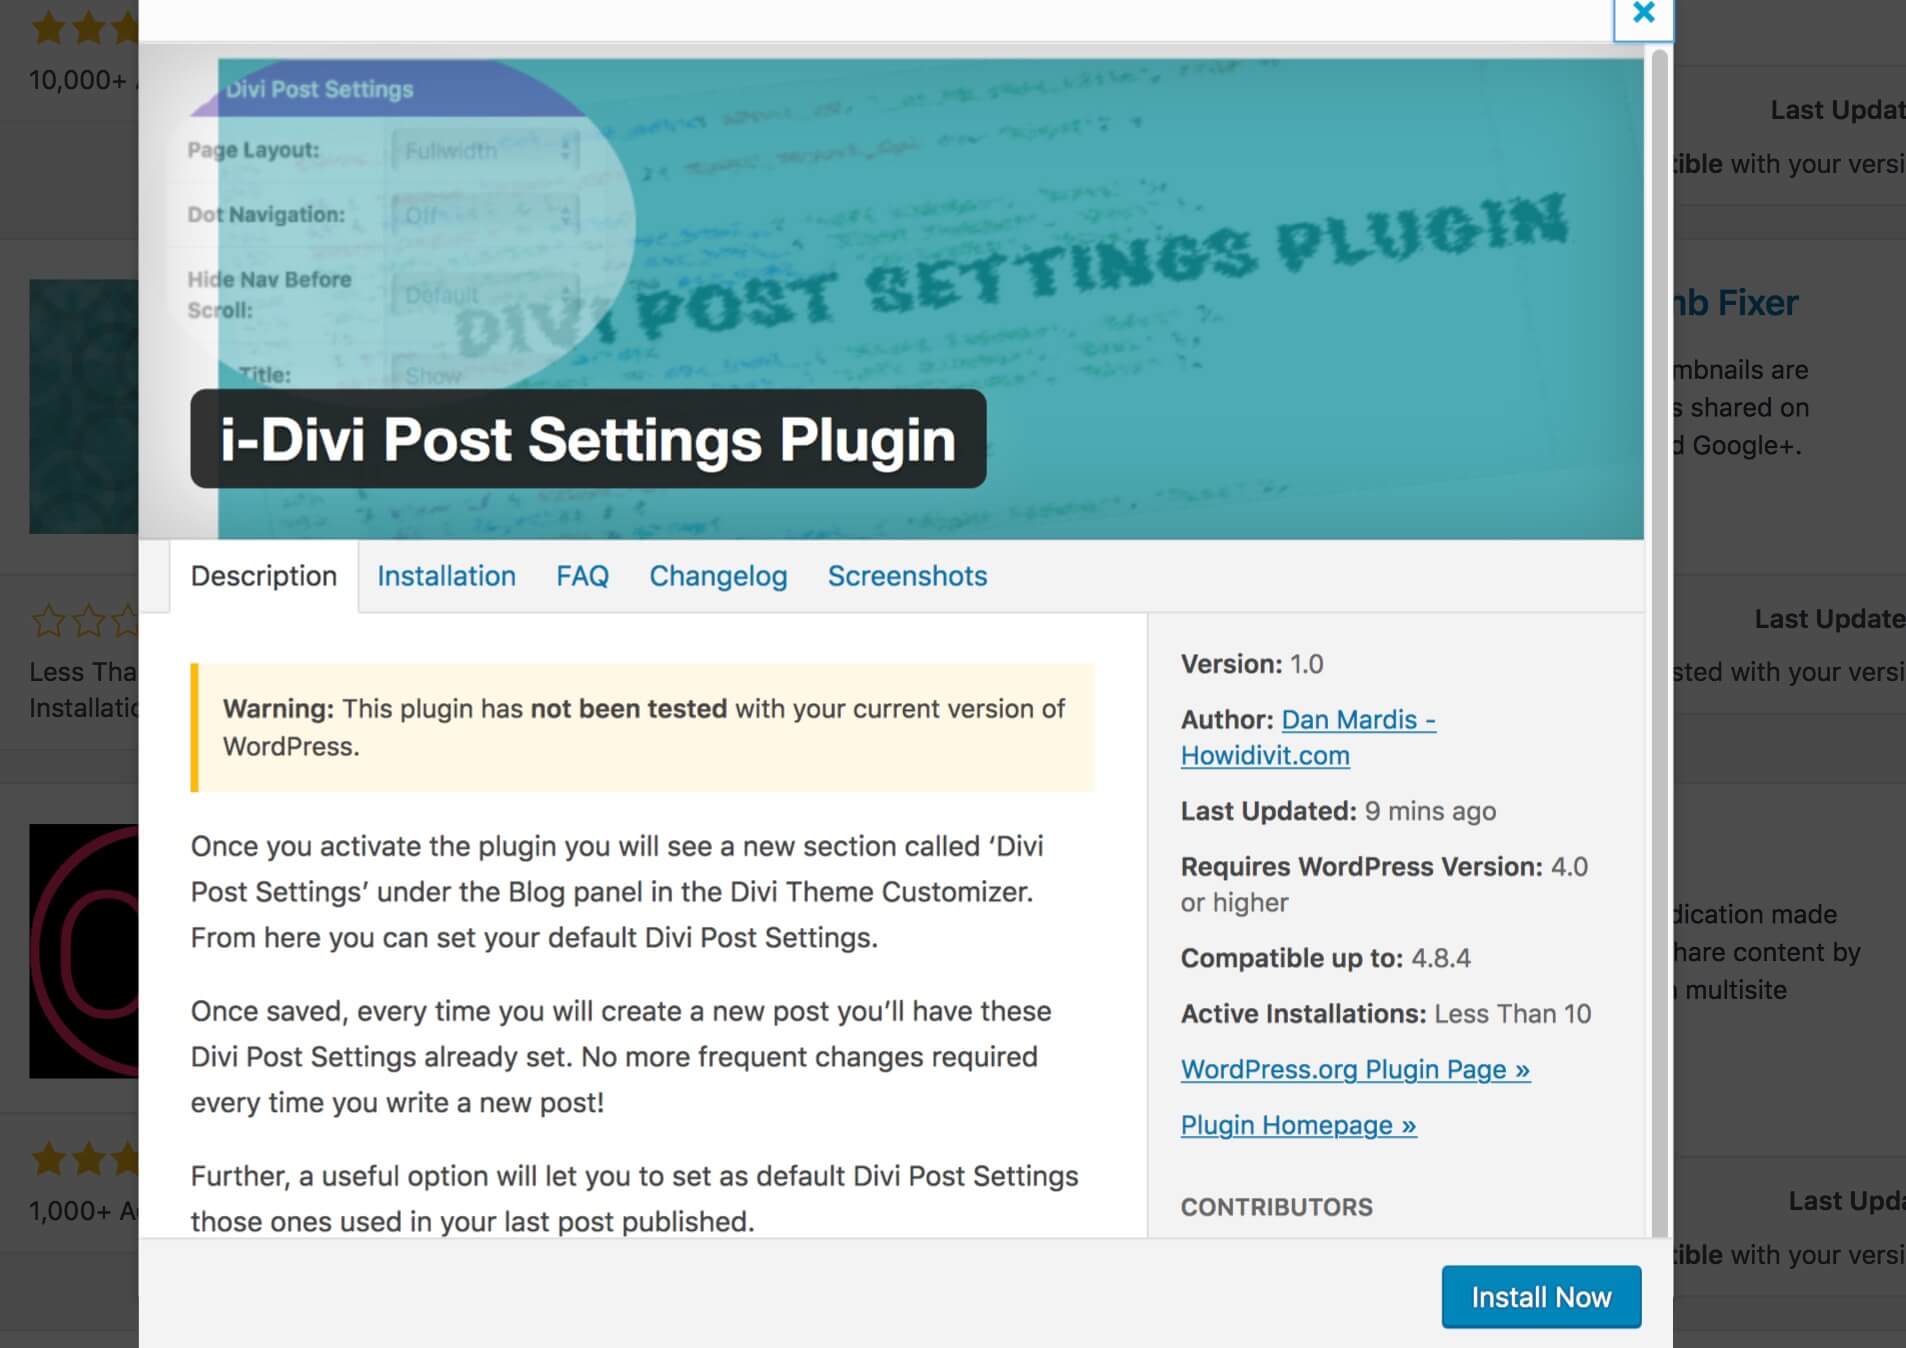 Divi Post Settings VII – Submit our plugin to the WordPress repository